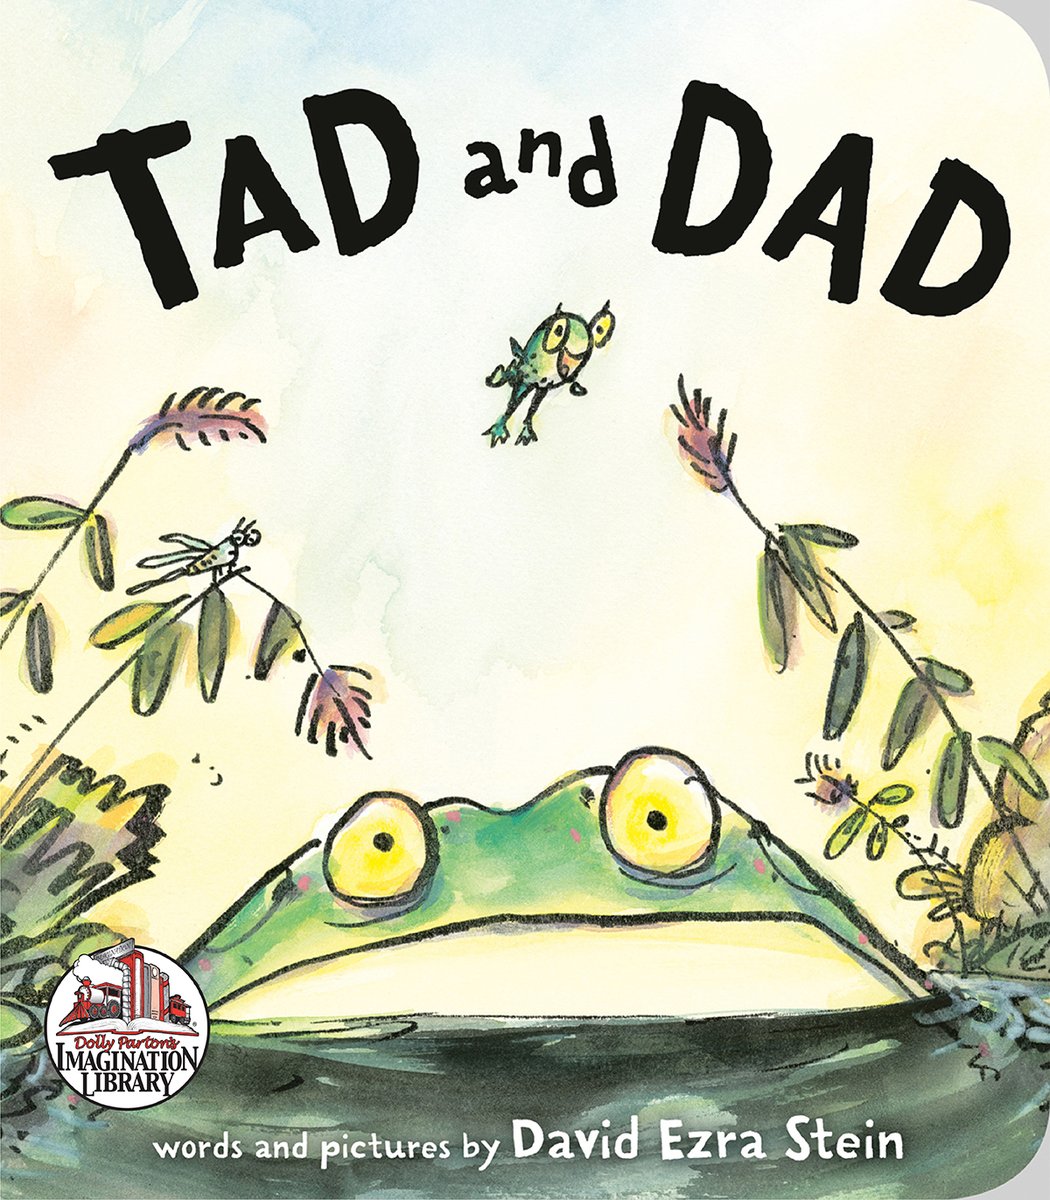 Here's a great story by David Ezra Stein! 'Tad and Dad' is a tale of a growing tadpole who loves his frog dad so much he never gives him a moment's peace. #DollysLibrary